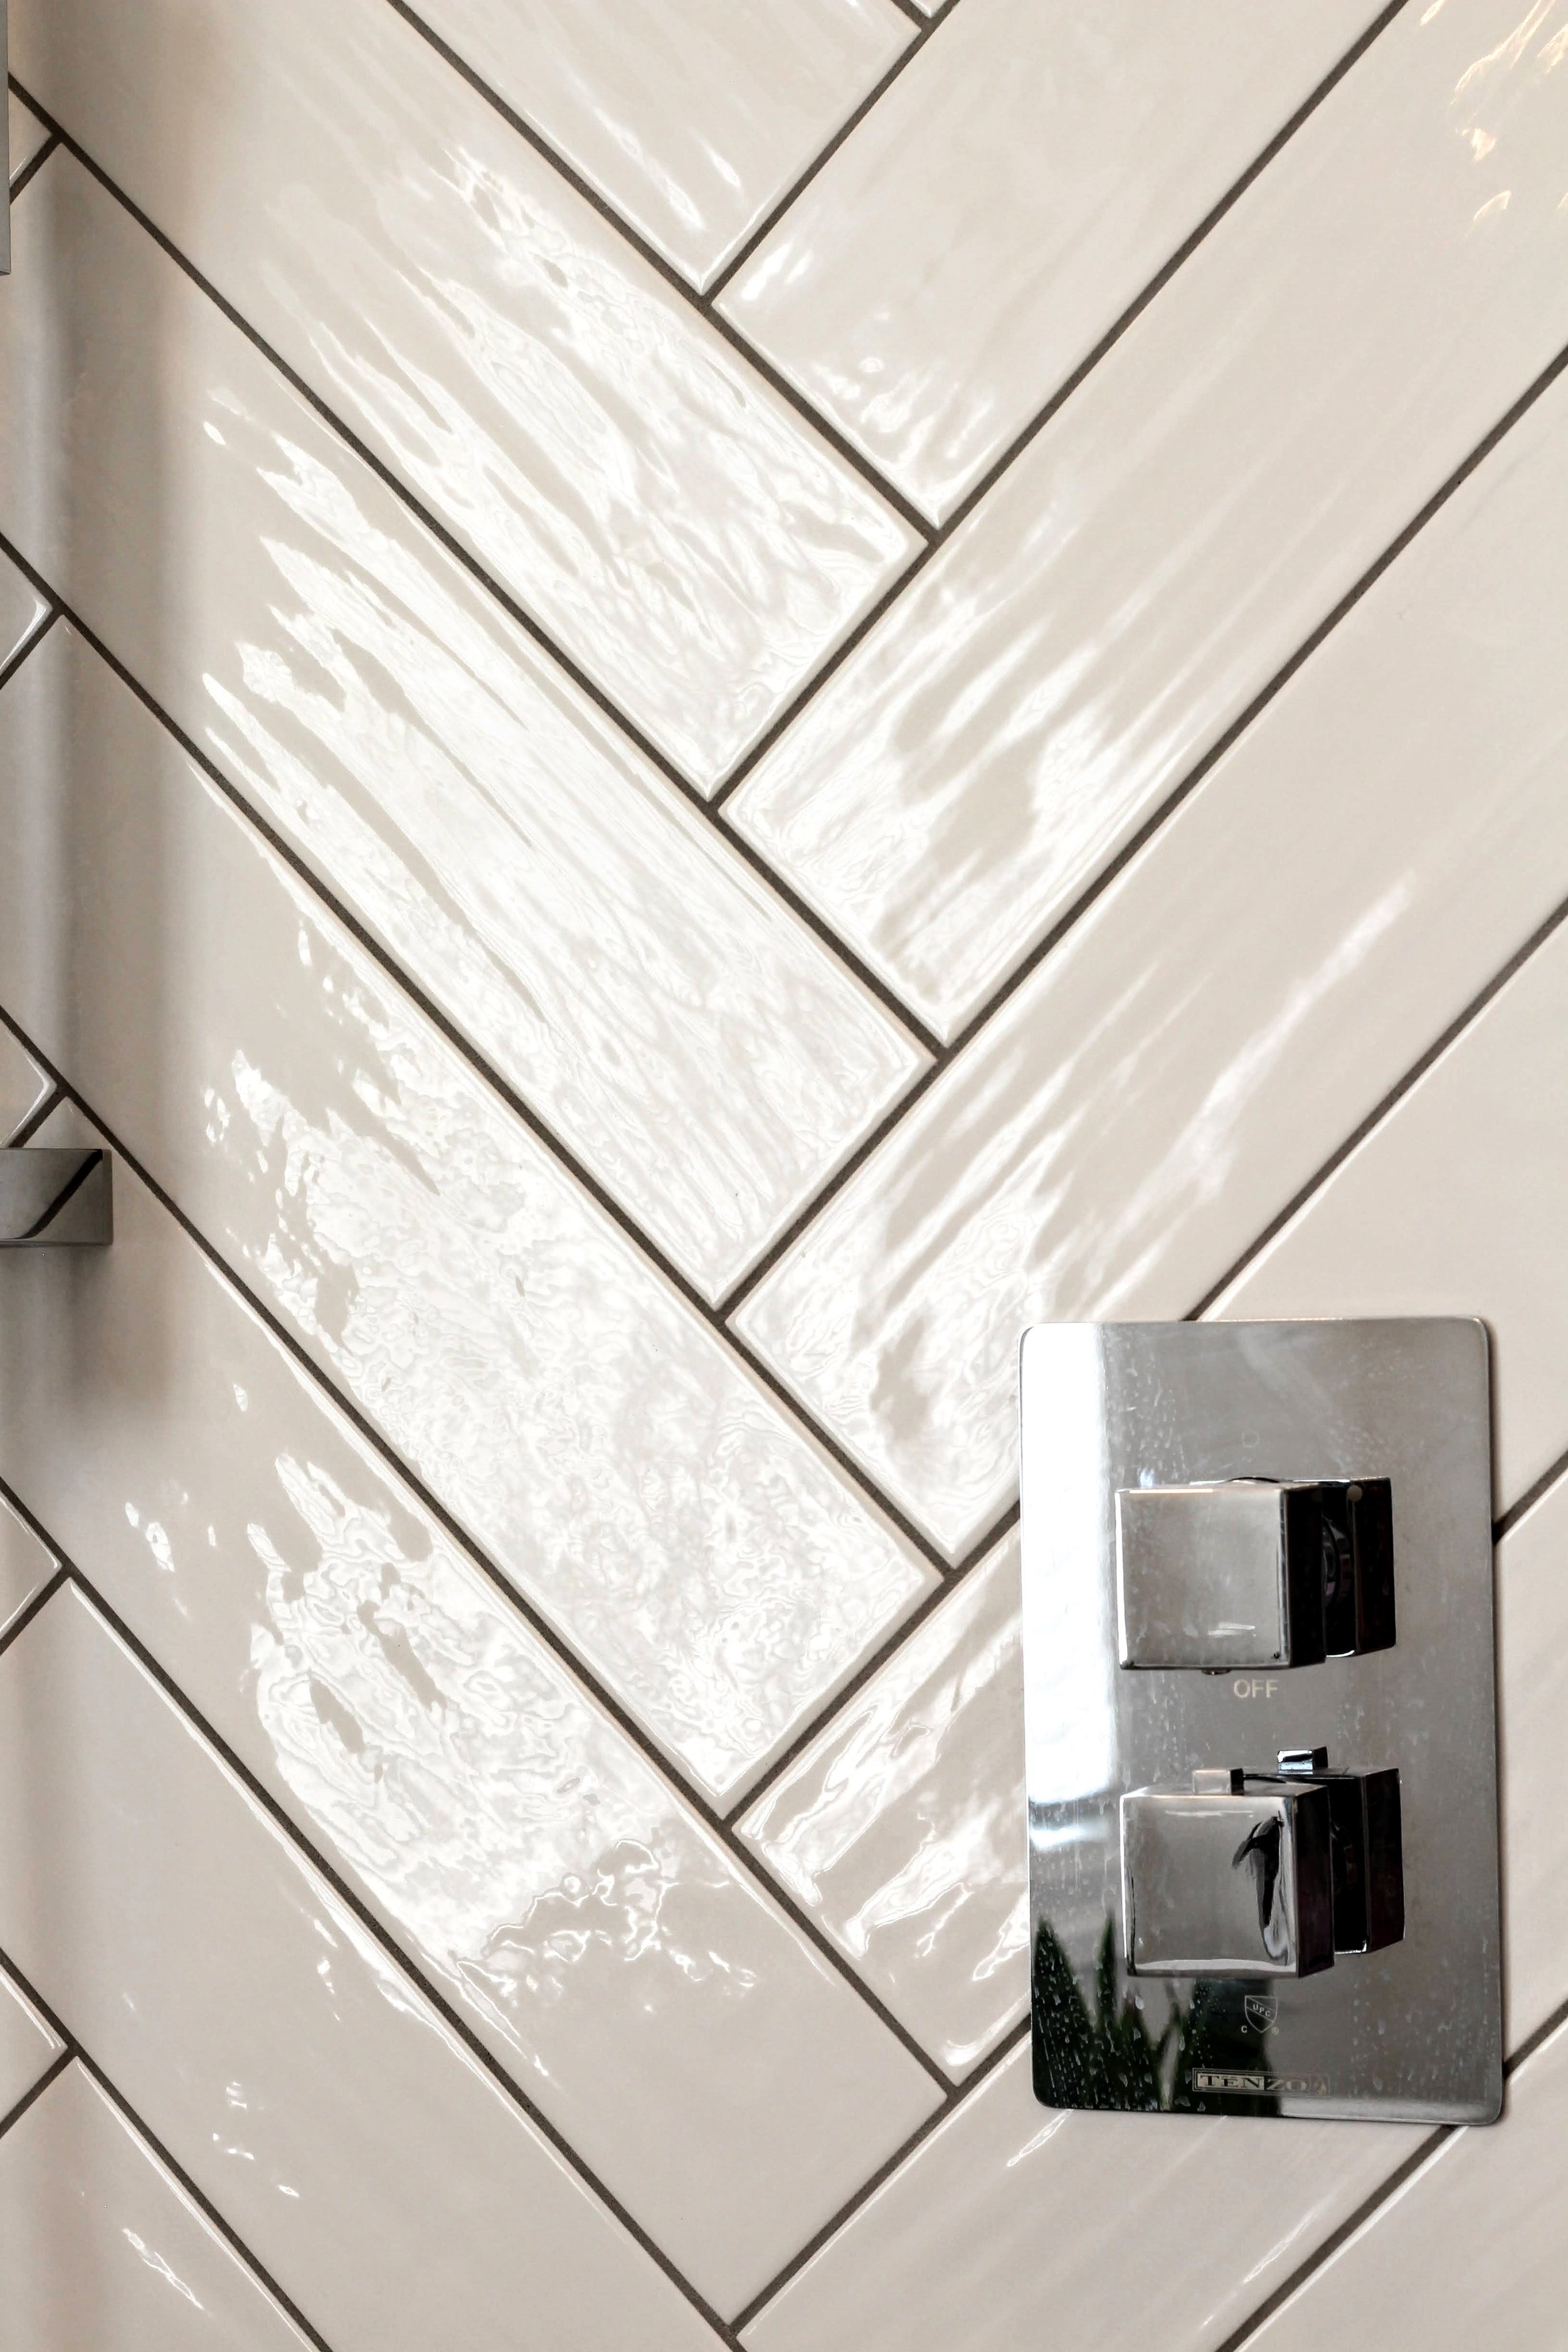 Ensuite design and decorating project with herringbone tiles